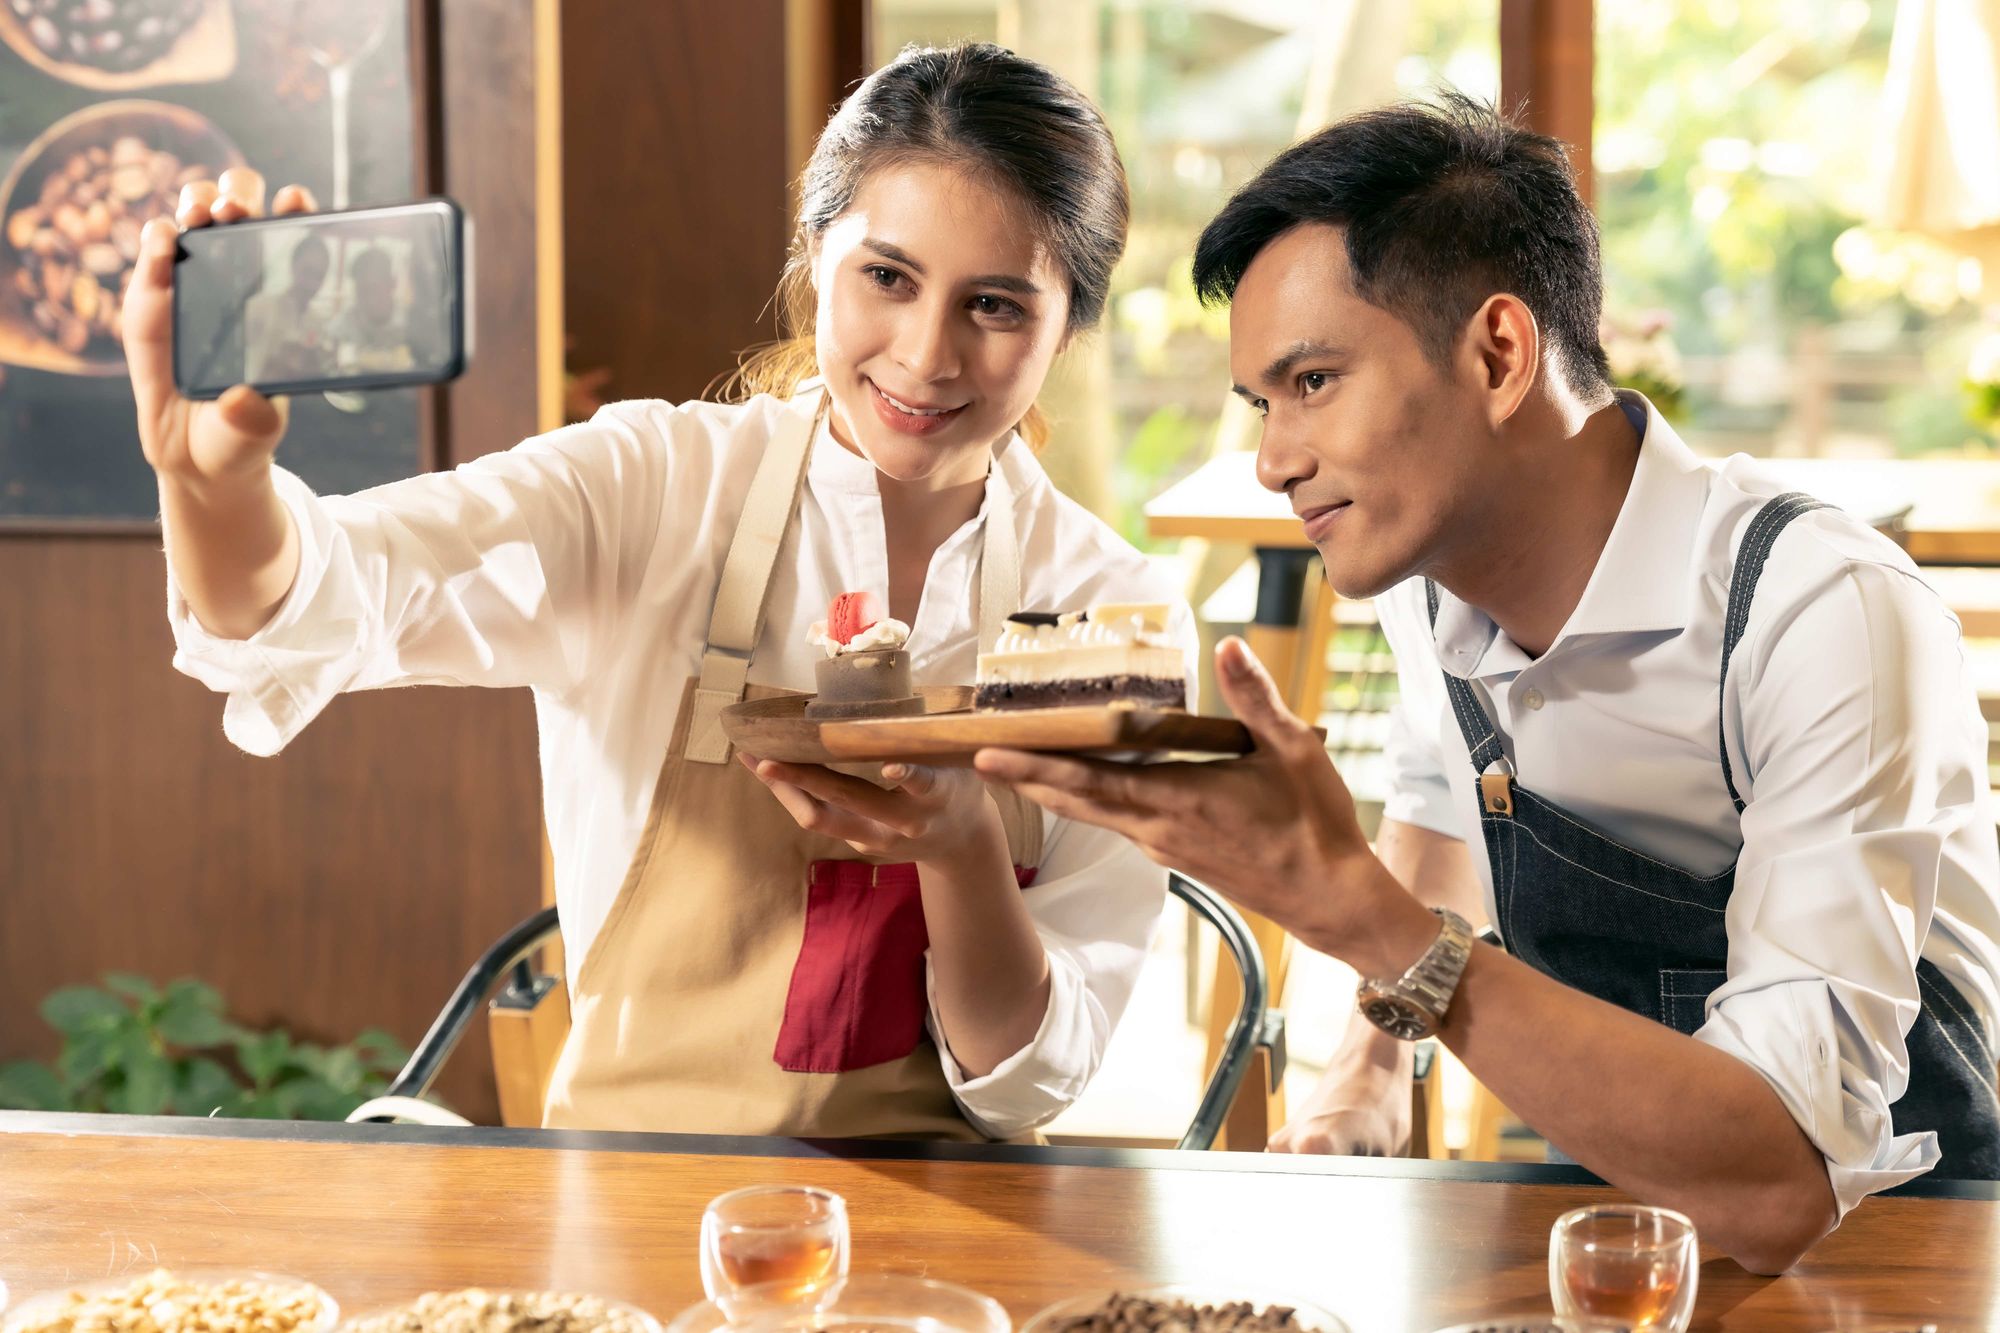 A man and woman chef take a selfie with a new dessert they just made.